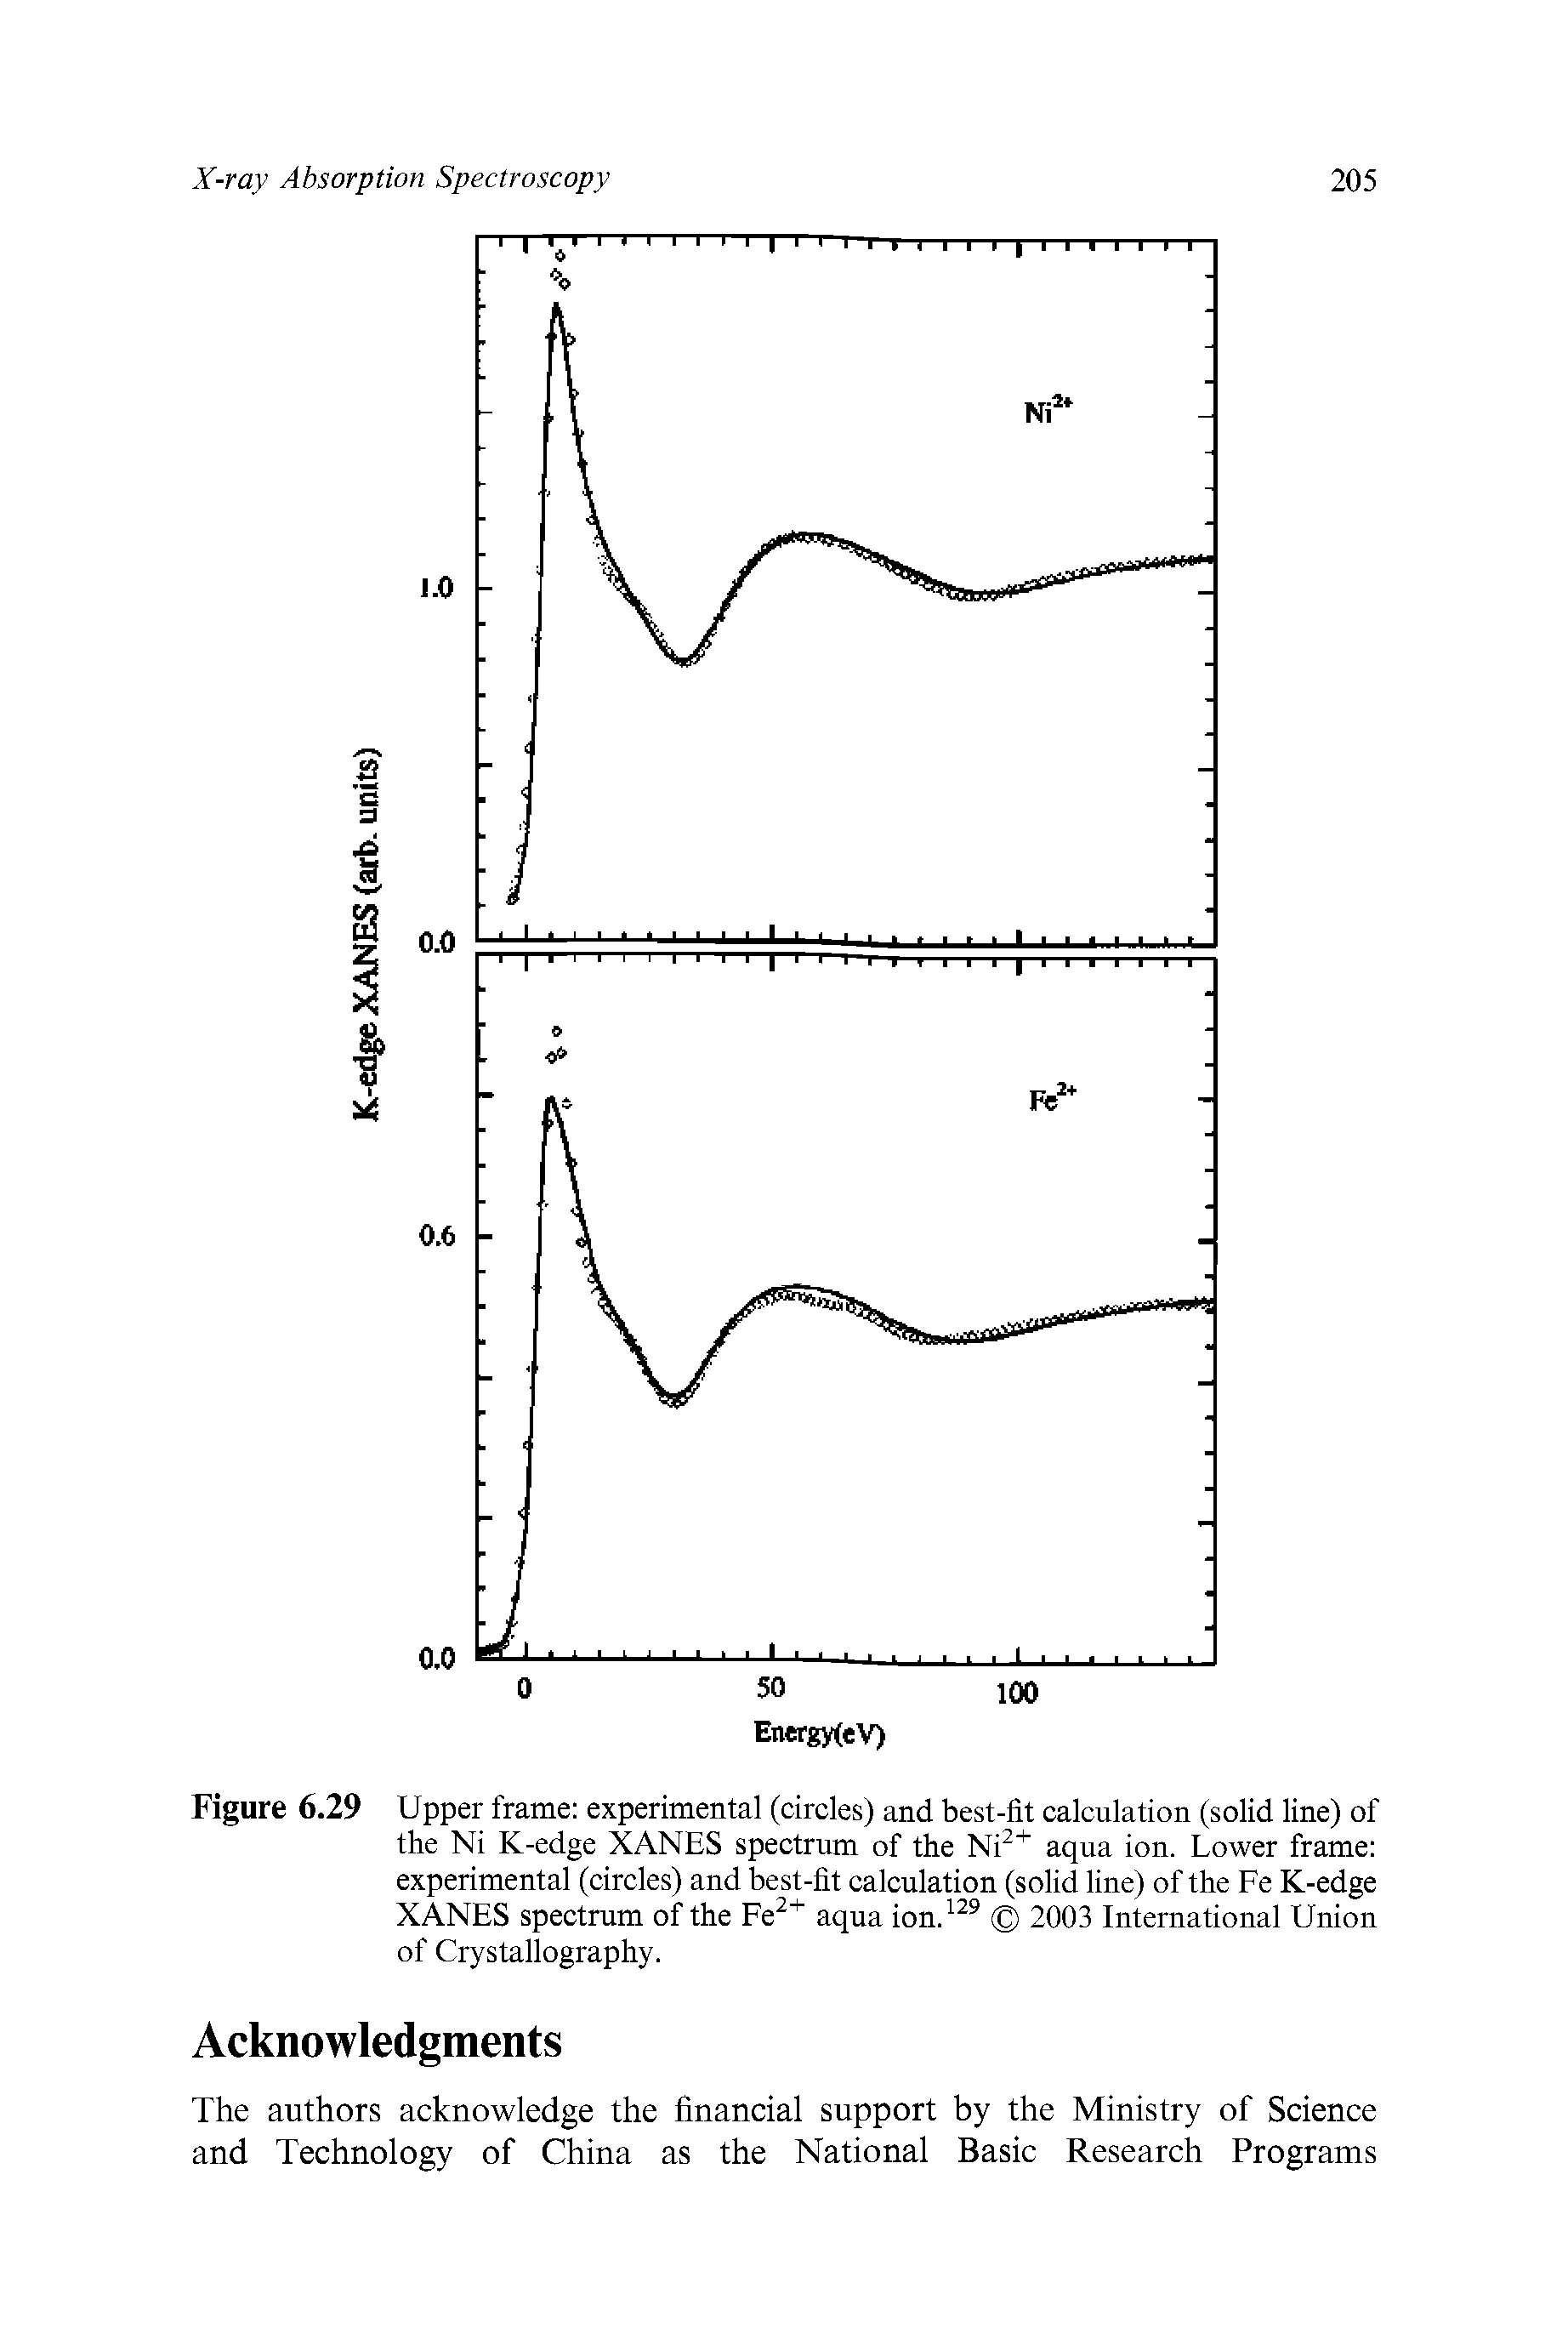 Figure 6.29 Upper frame experimental (circles) and best-fit calculation (solid line) of the Ni K-edge XANES spectrum of the aqua ion. Lower frame experimental (circles) and best-fit calculation (solid line) of the Fe K-edge XANES spectrum of the Fe aqua ion. 2003 International Union of Crystallography.